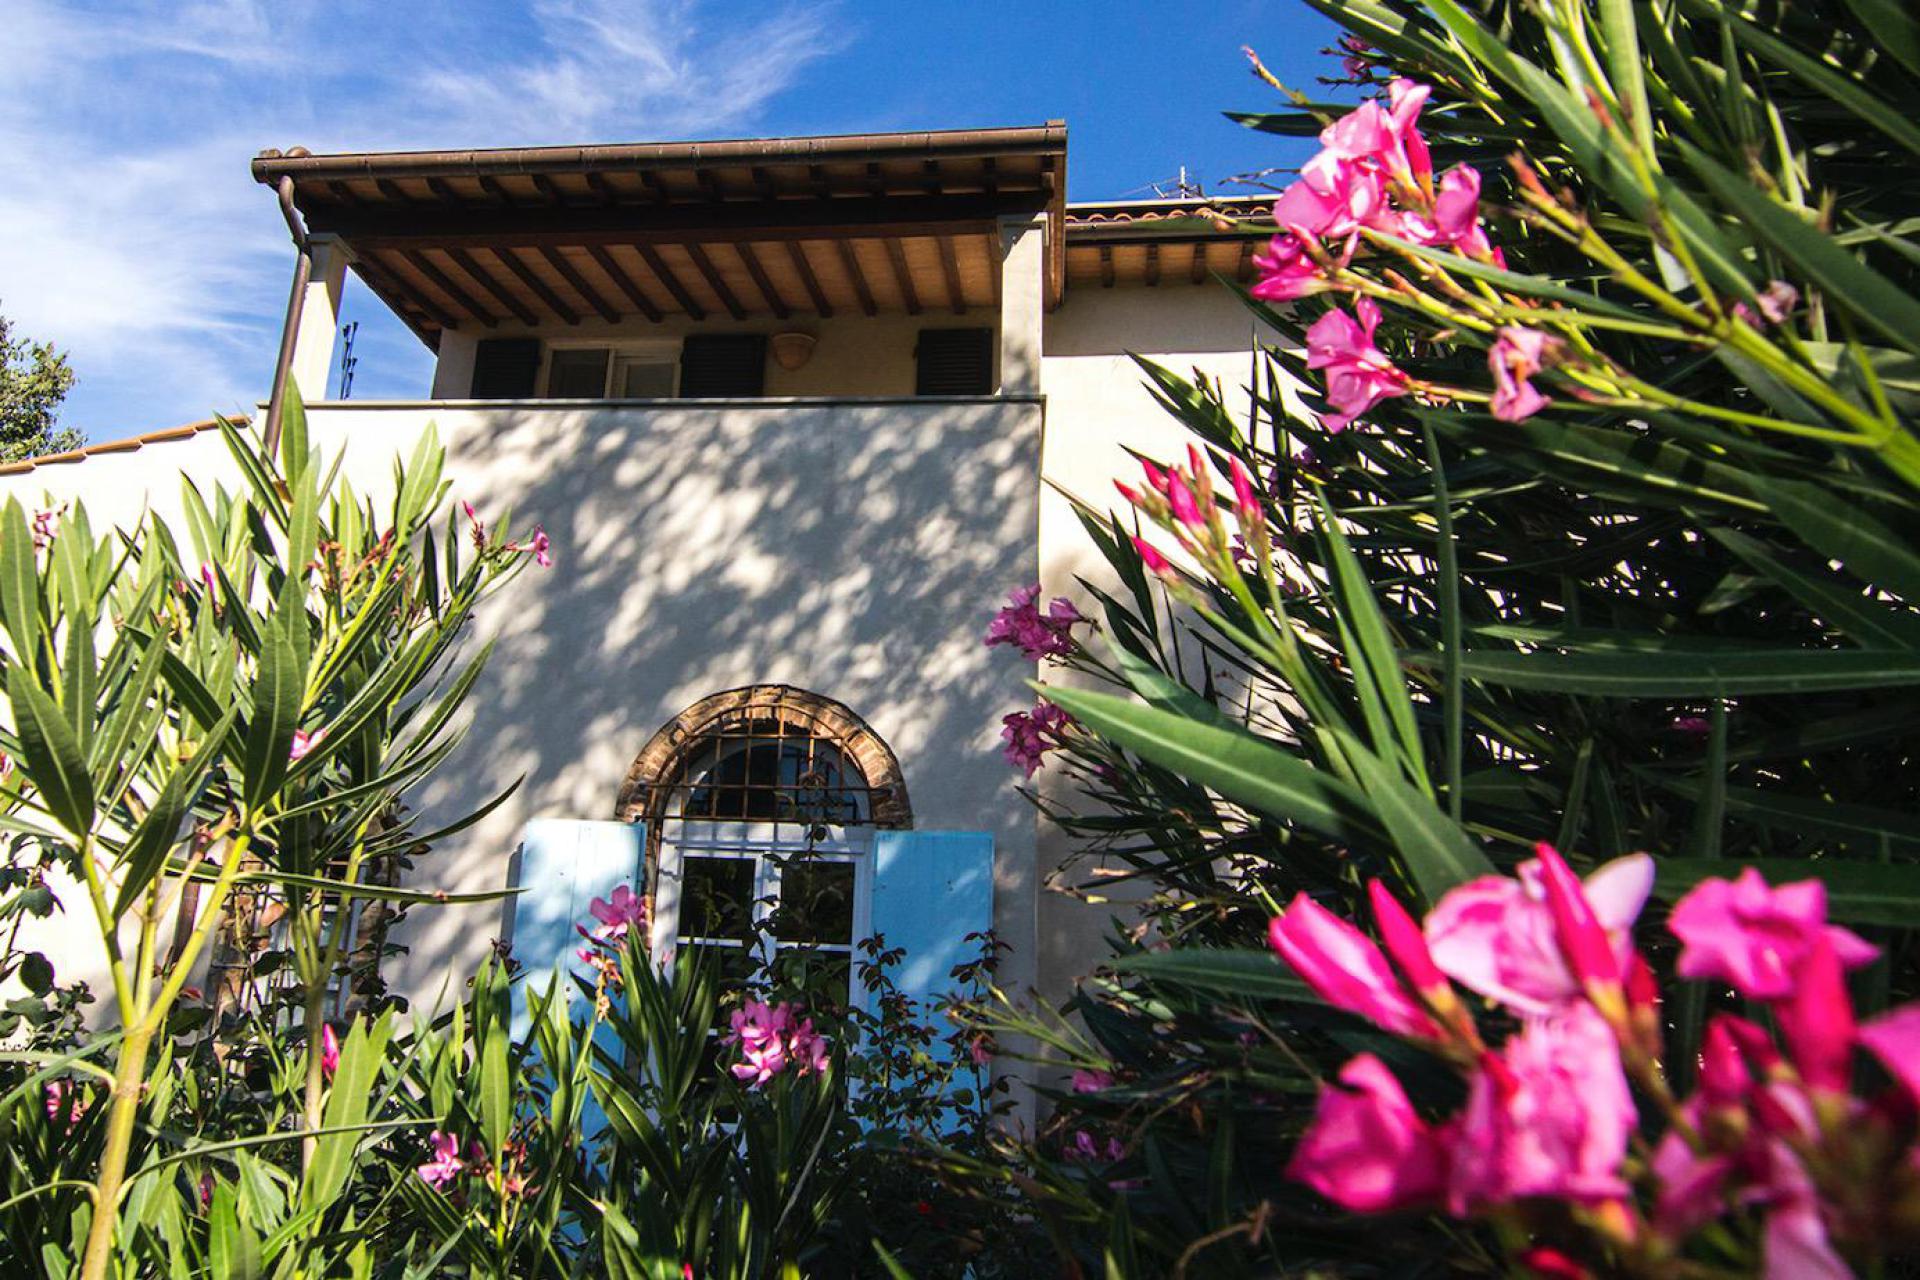 Agriturismo Tuscany Small organic holiday farm in the Tuscan hills